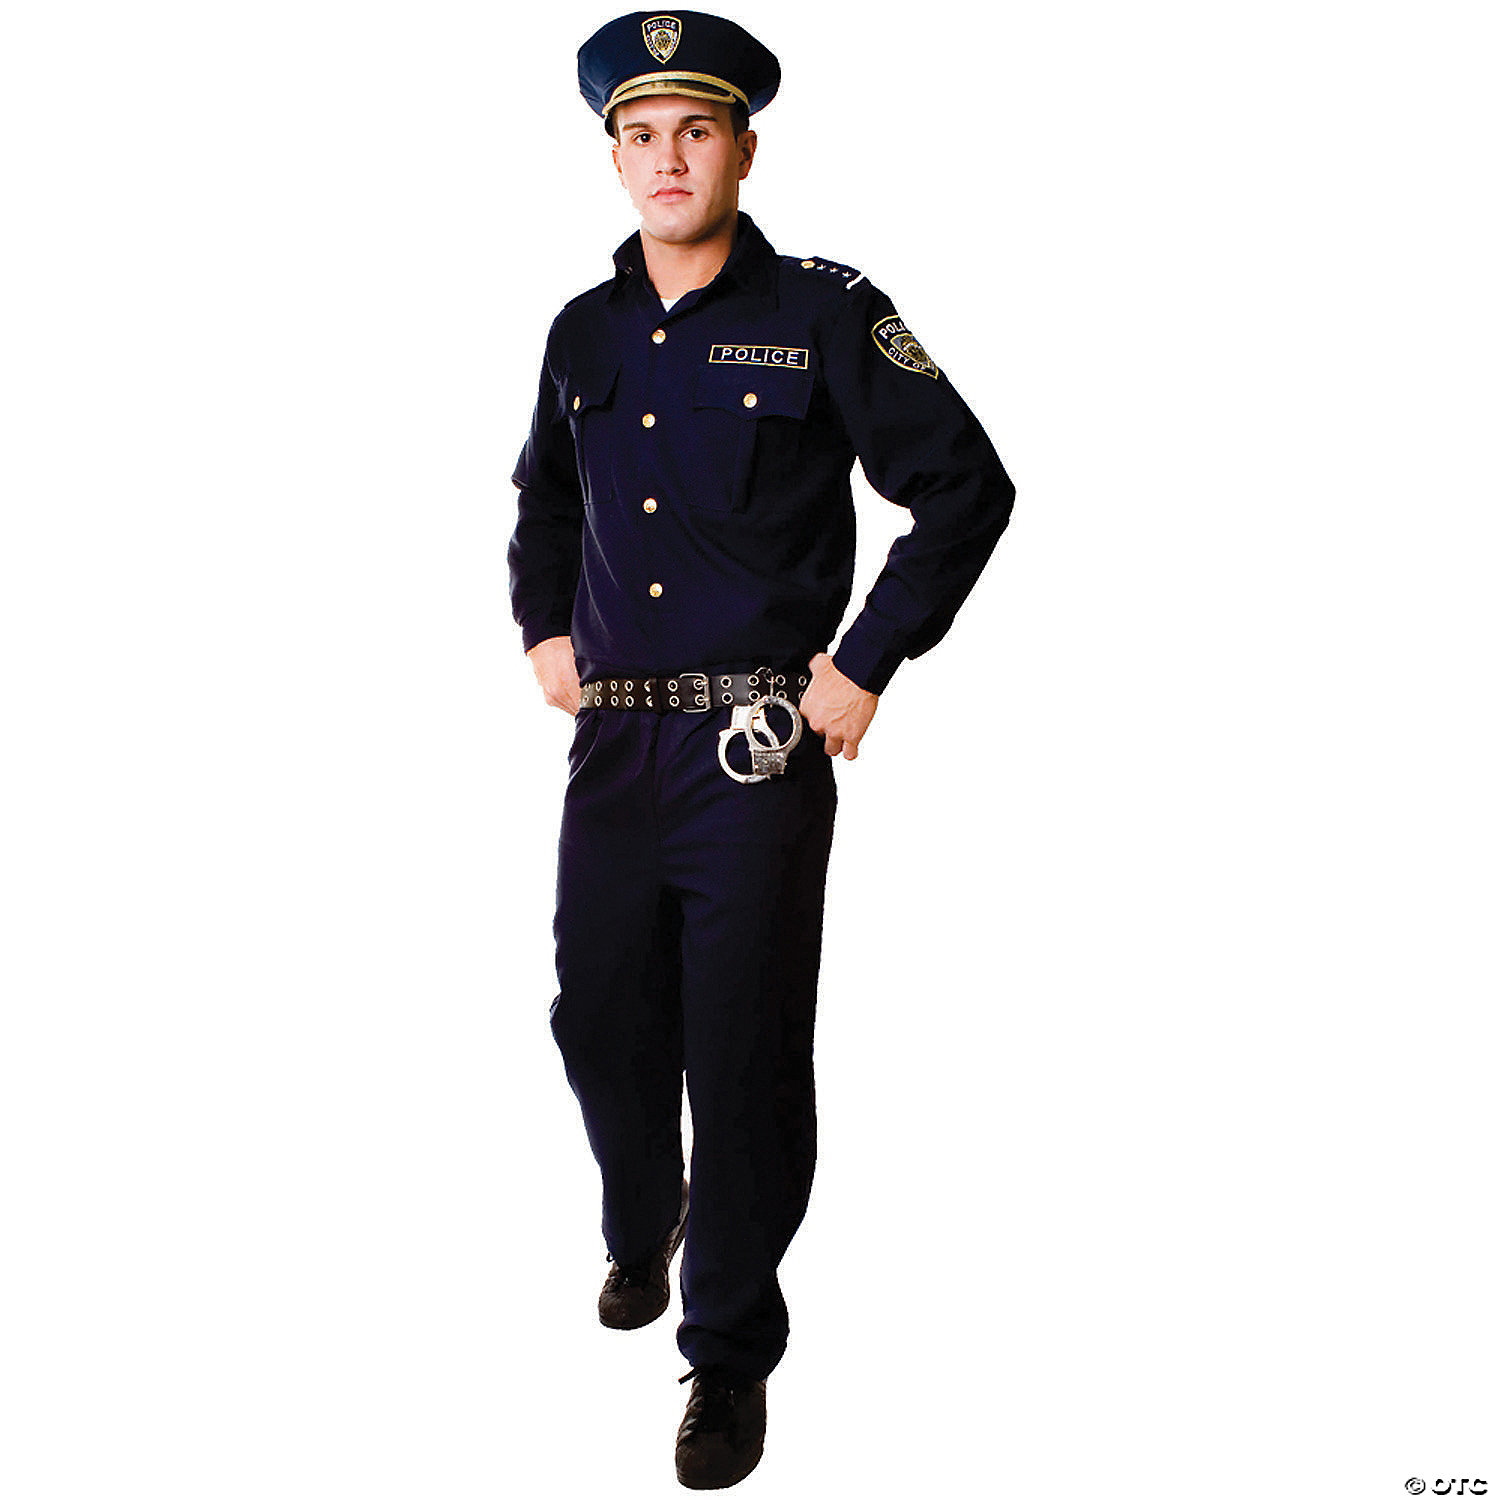 Adult Police Officer Costume - Deluxe